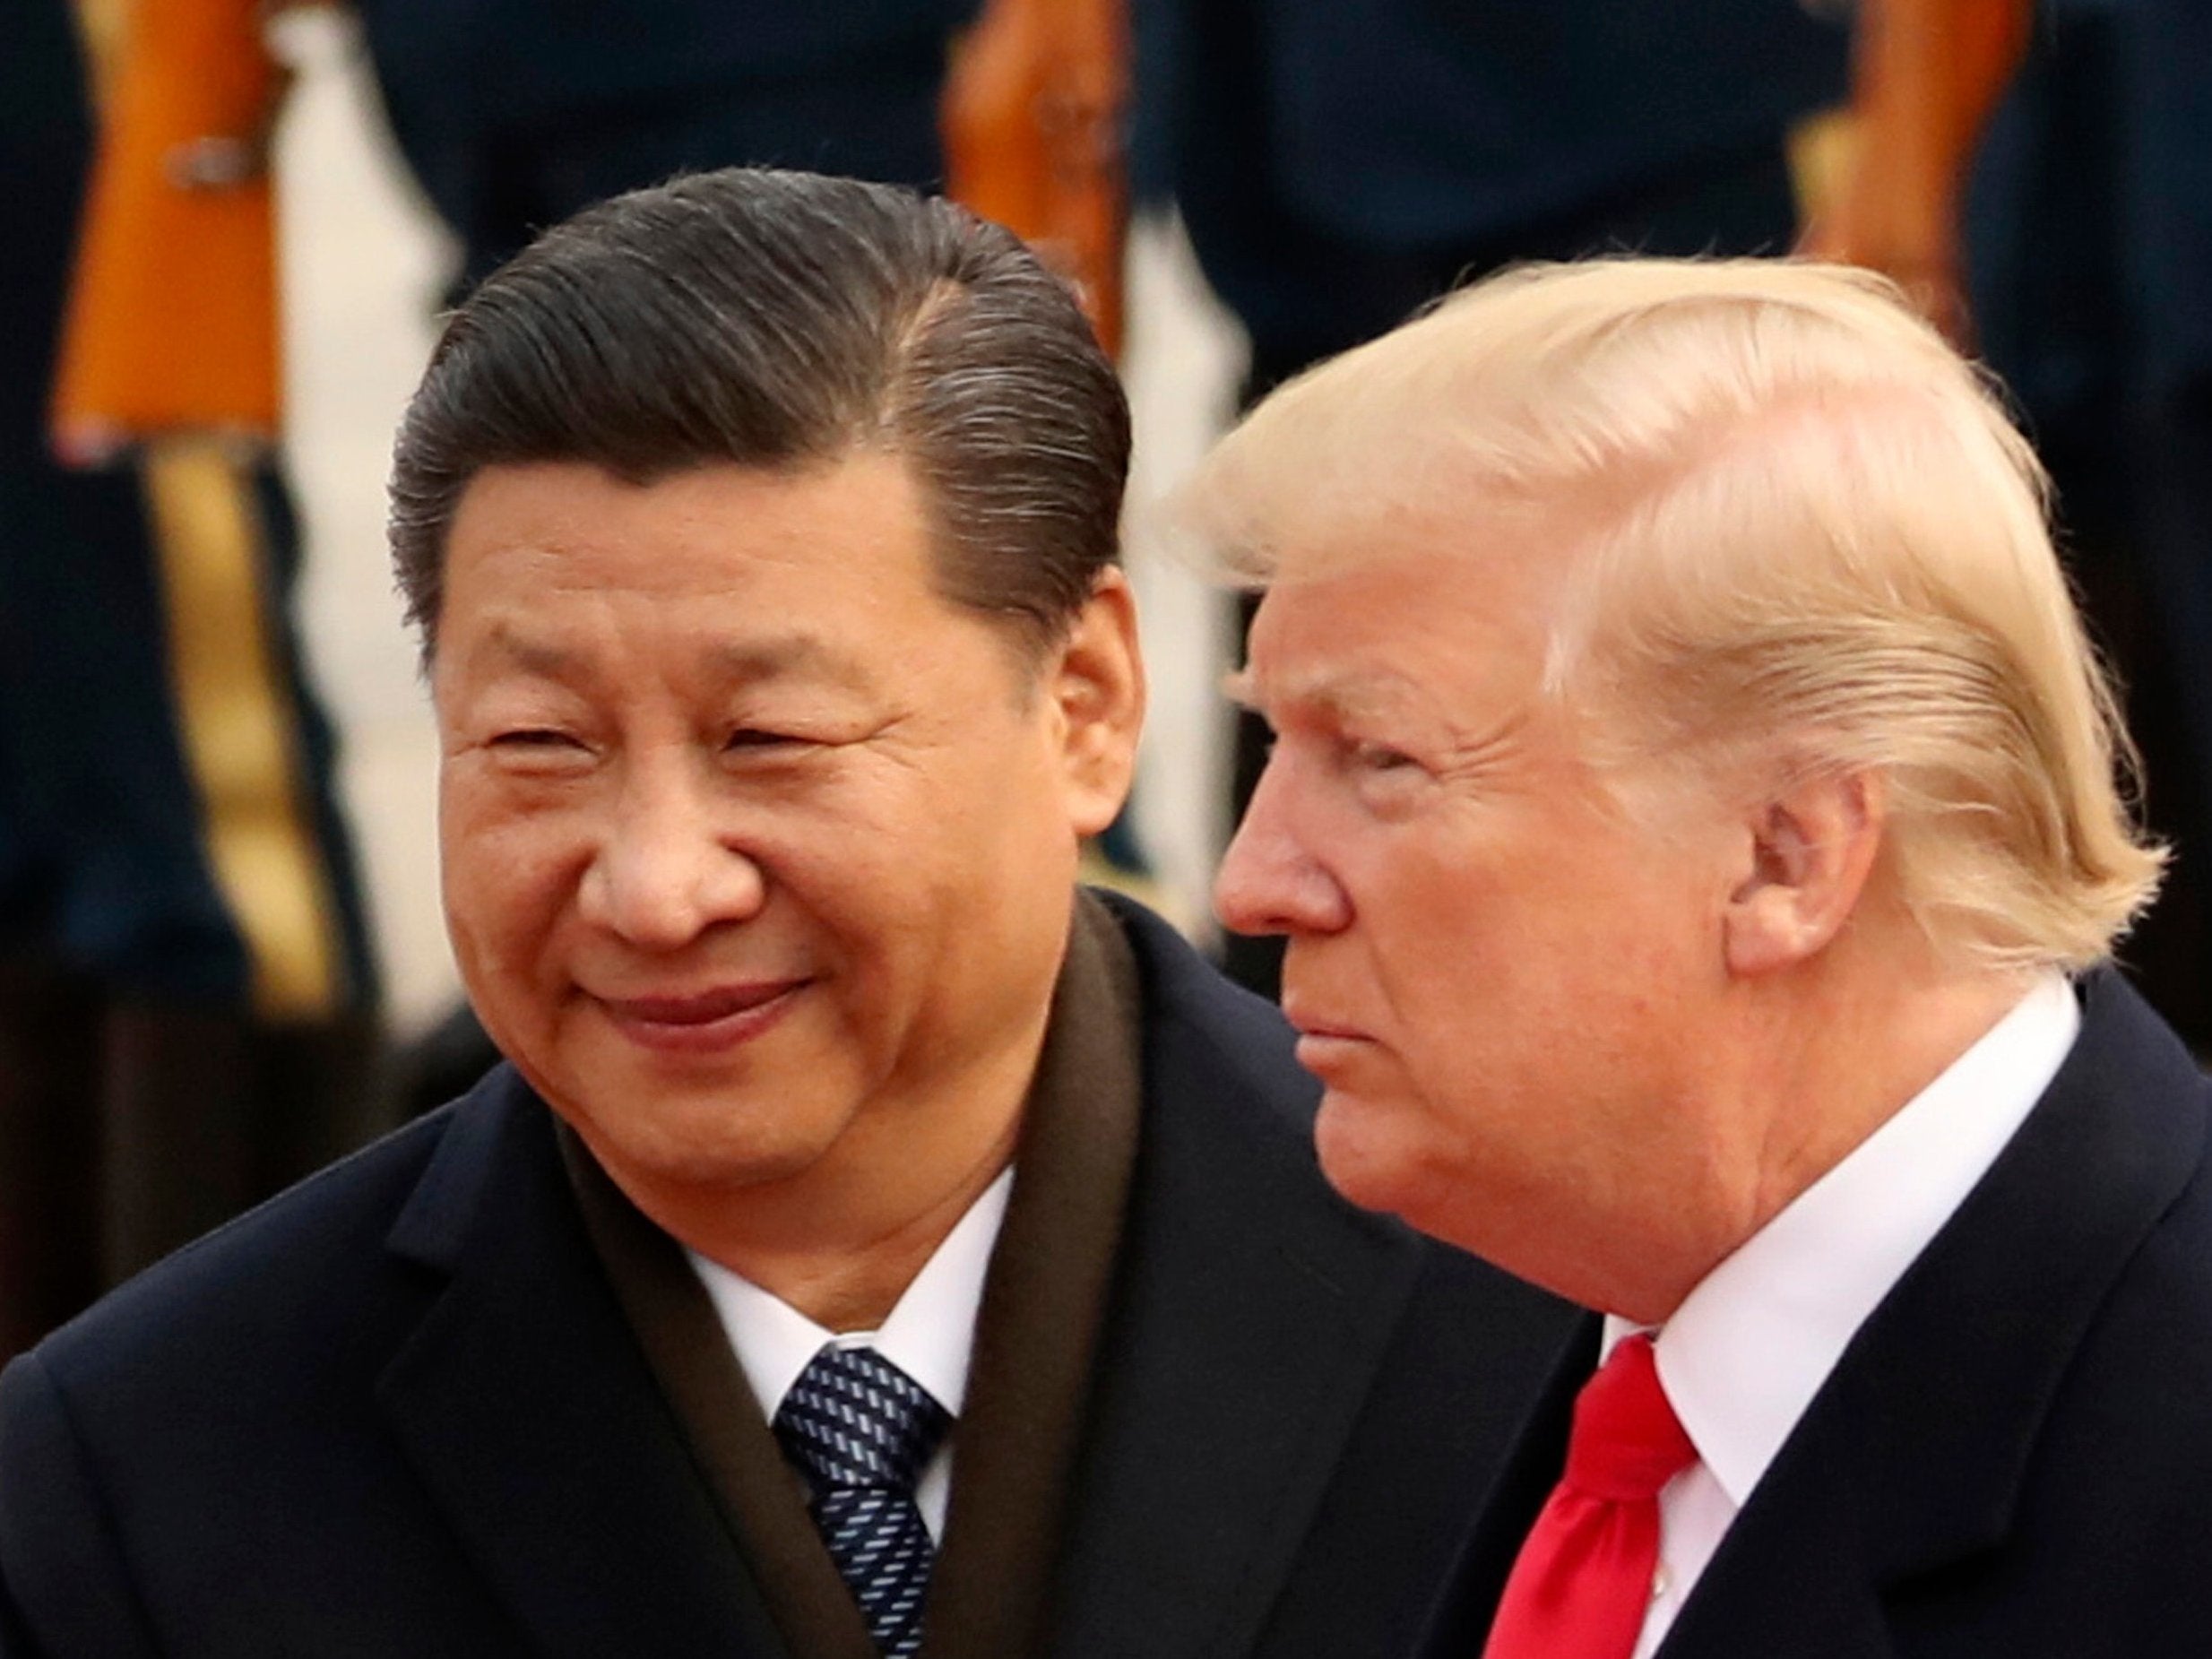 While it is possible to overestimate the importance of the meeting between presidents Trump and Xi, there is no question that a reasonable accord between them is important not just for the US and China, but for the world economy as a whole